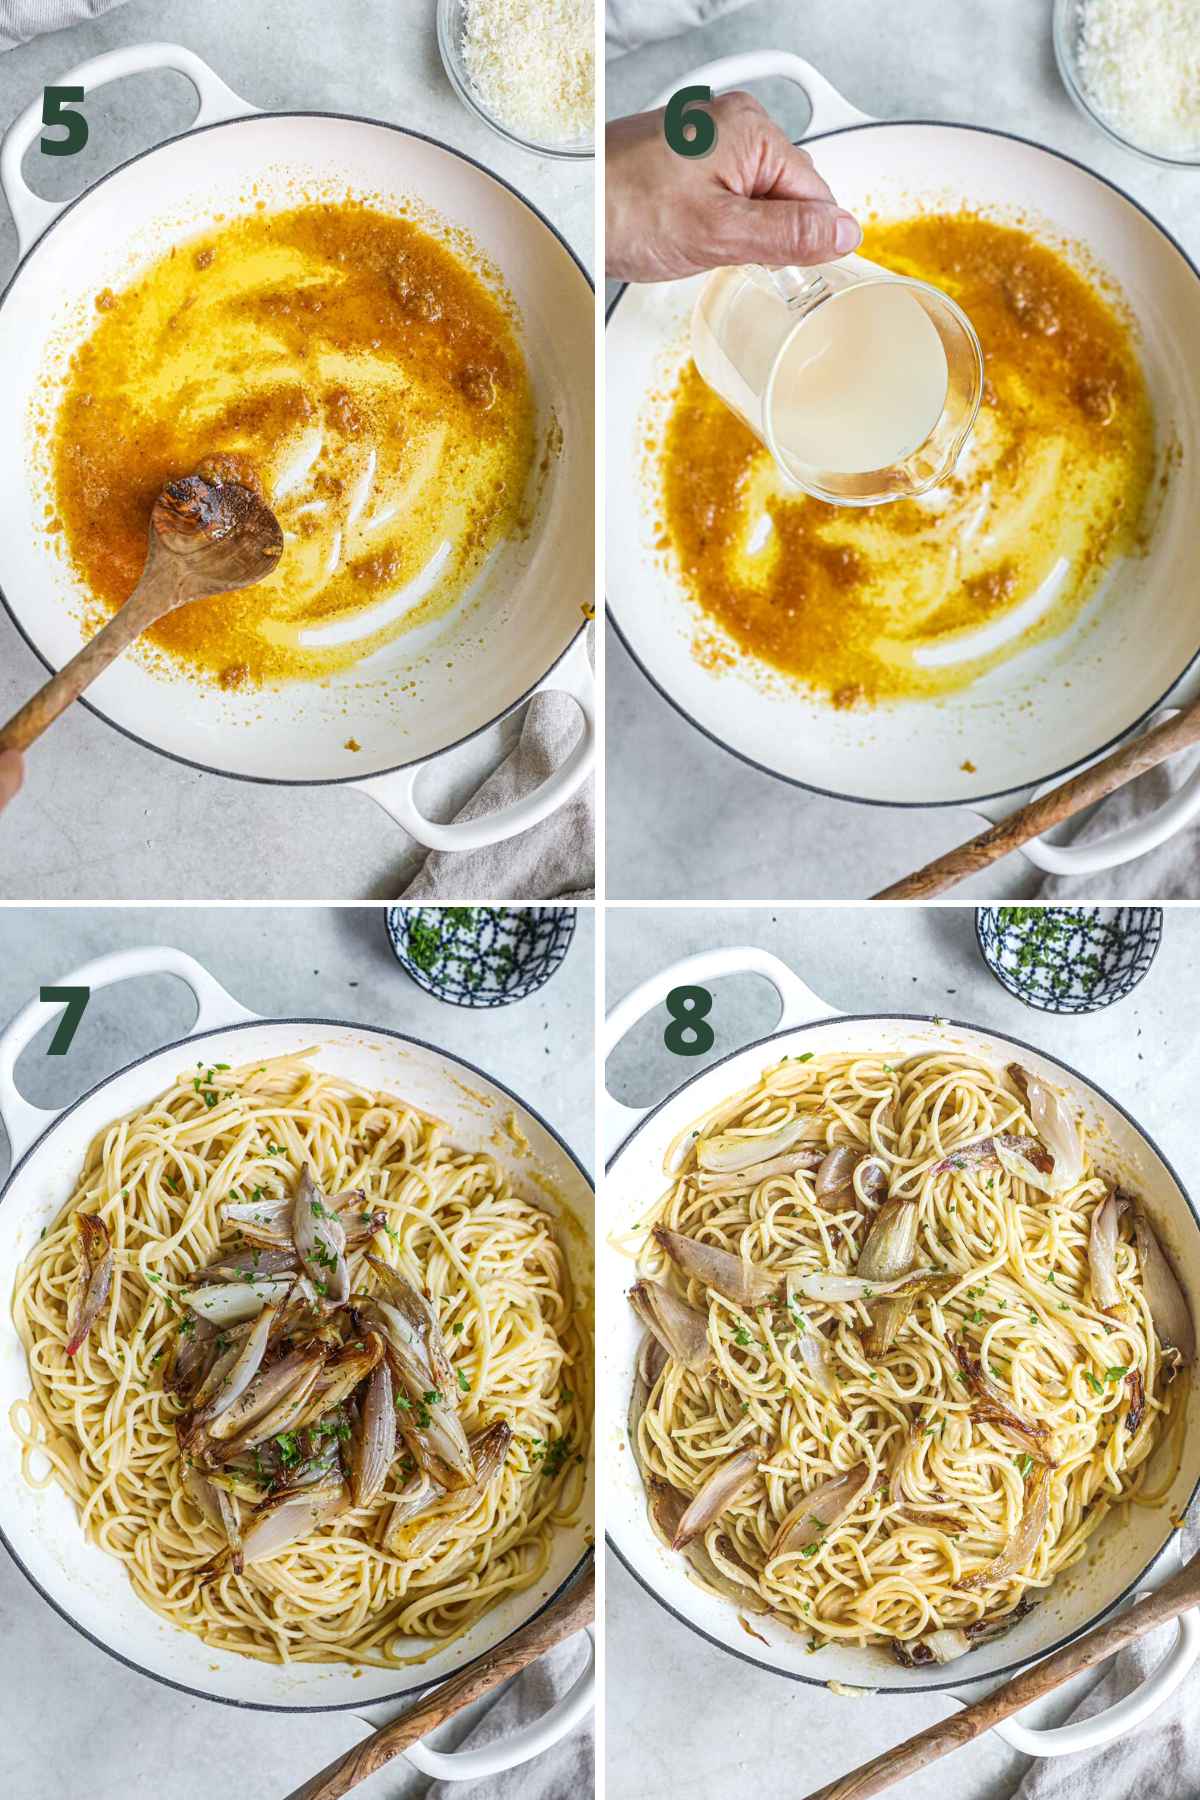 Step to make miso pasta with caramelized shallots, including making the miso butter sauce with pasta water, adding parmigiano-reggiano, and tossing with shallots and parsley.